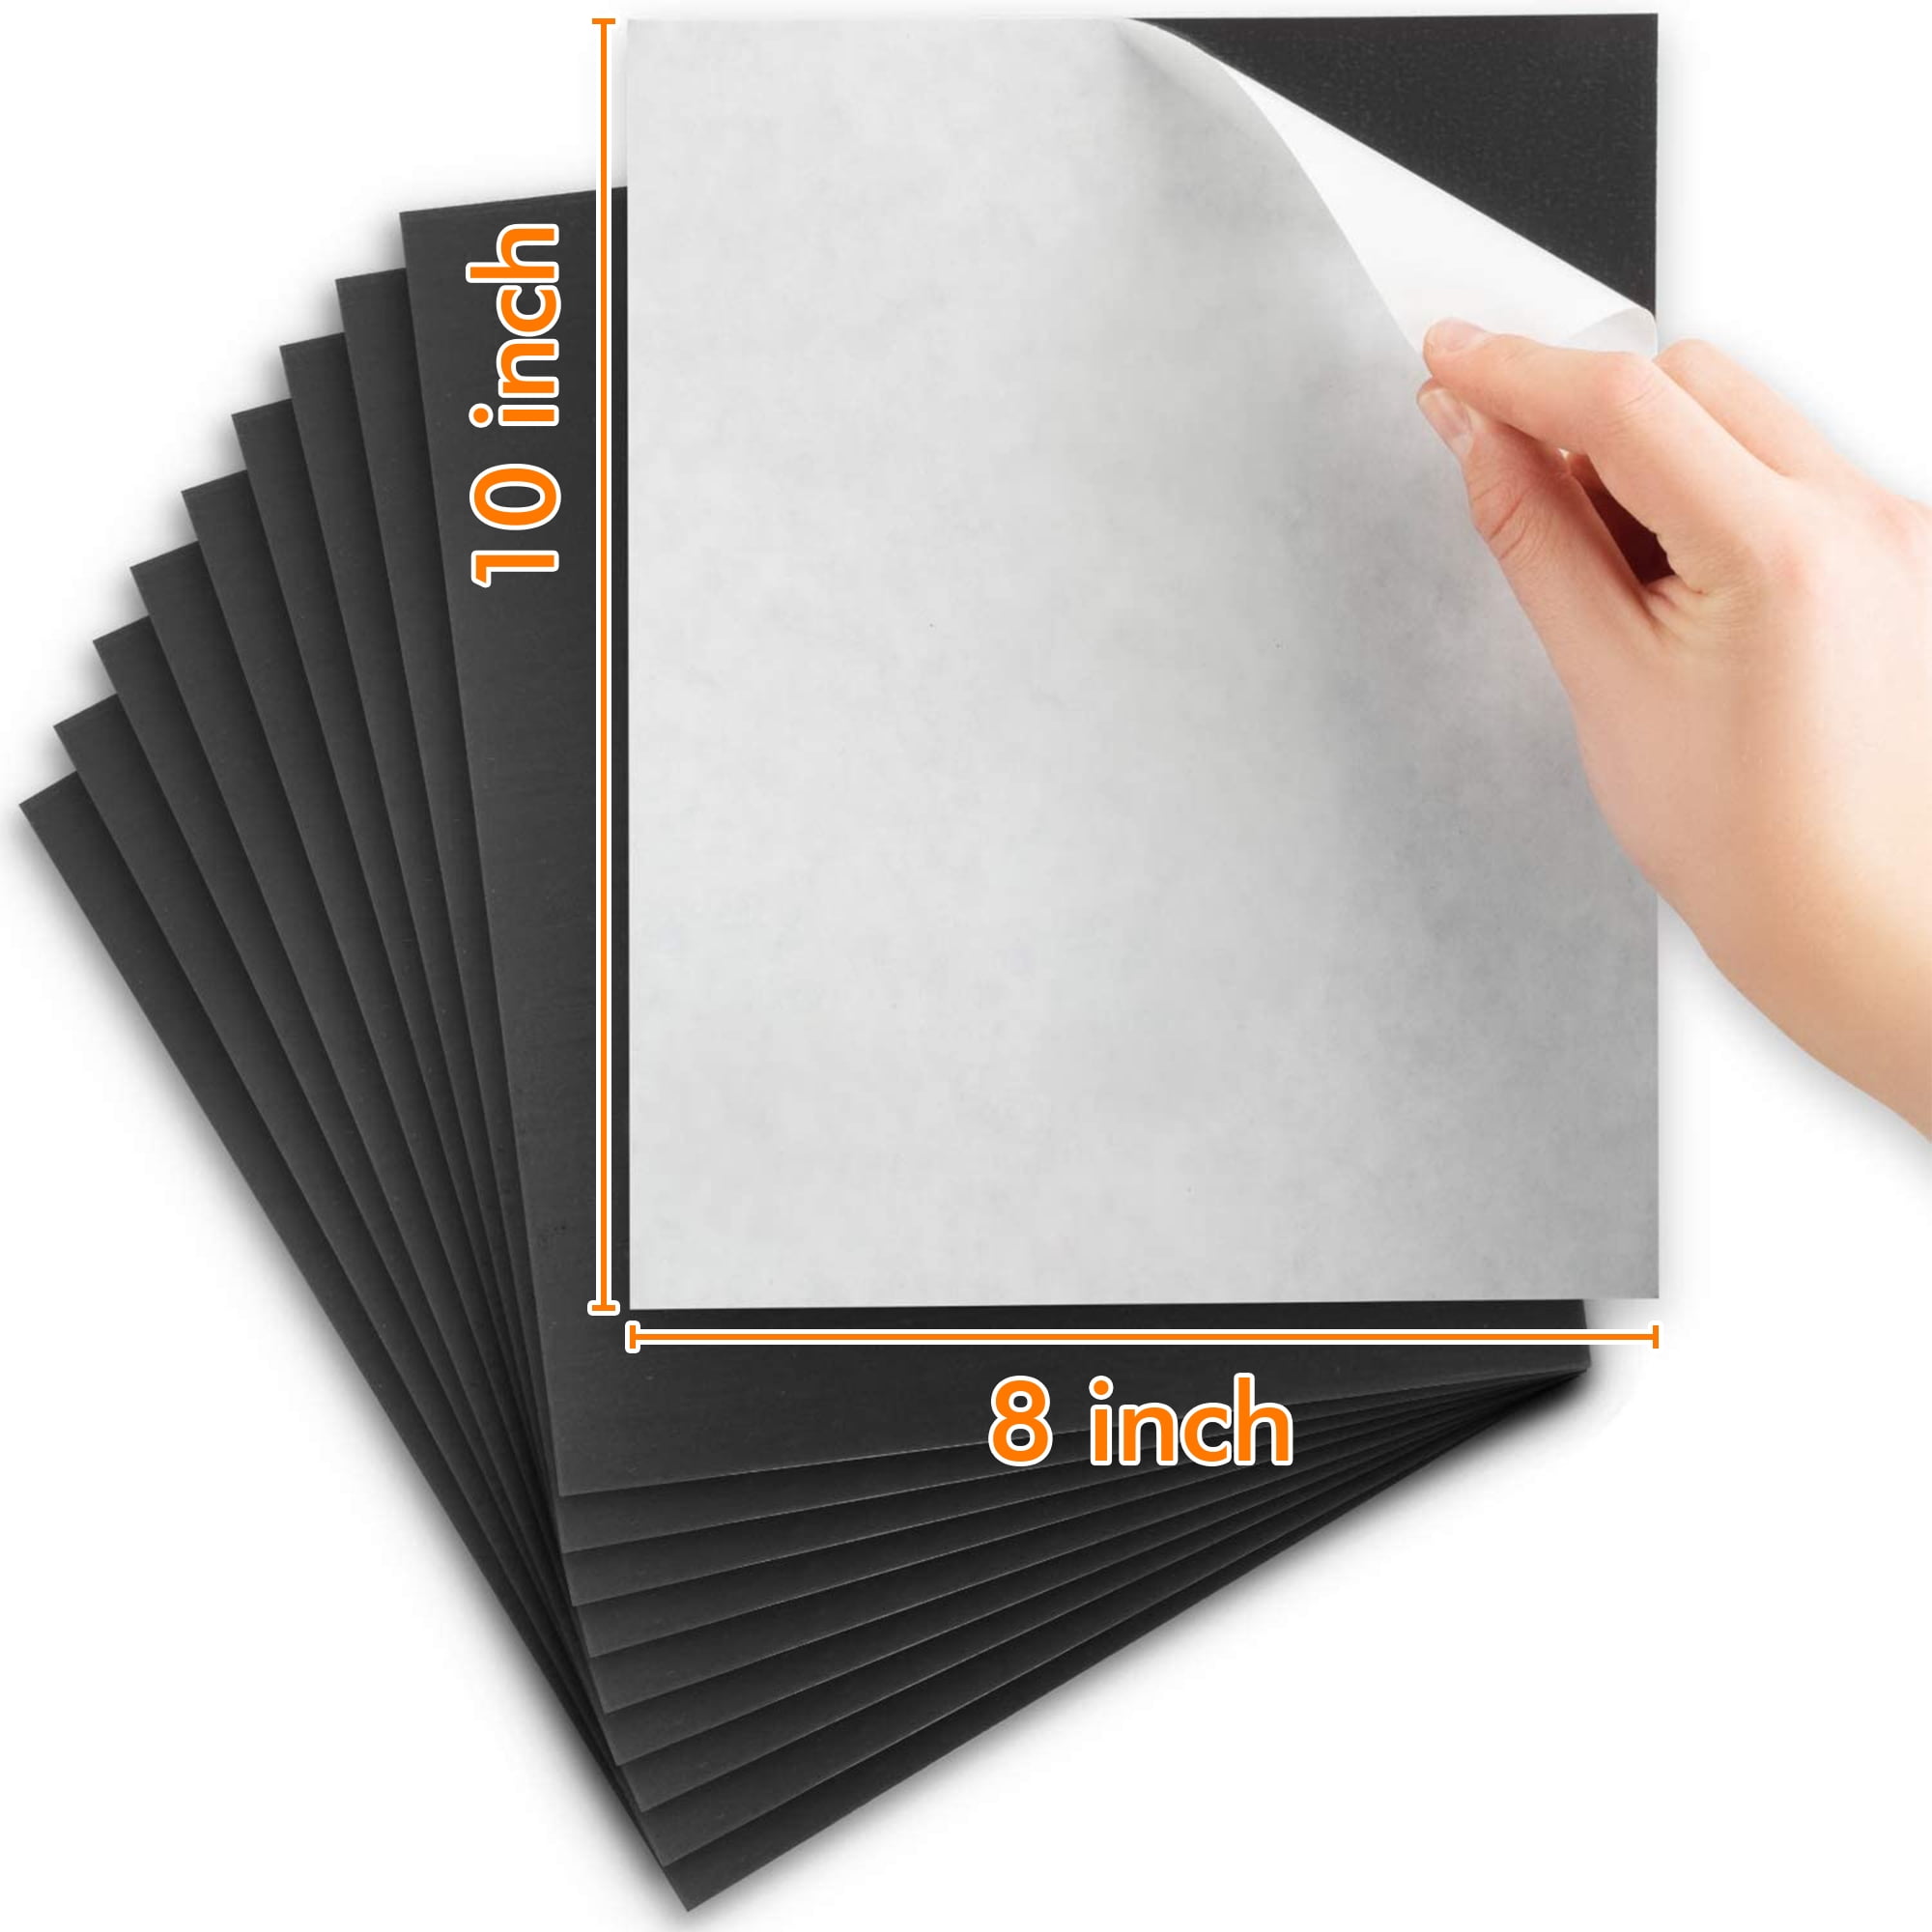 12 Sheets Self-Adhesive Magnetic Sheets 8x10 Inches 26mil Strong Flexible DIY Photo Ablum , Magnet Paper with Adhesive Backing, Size: 8 x 10